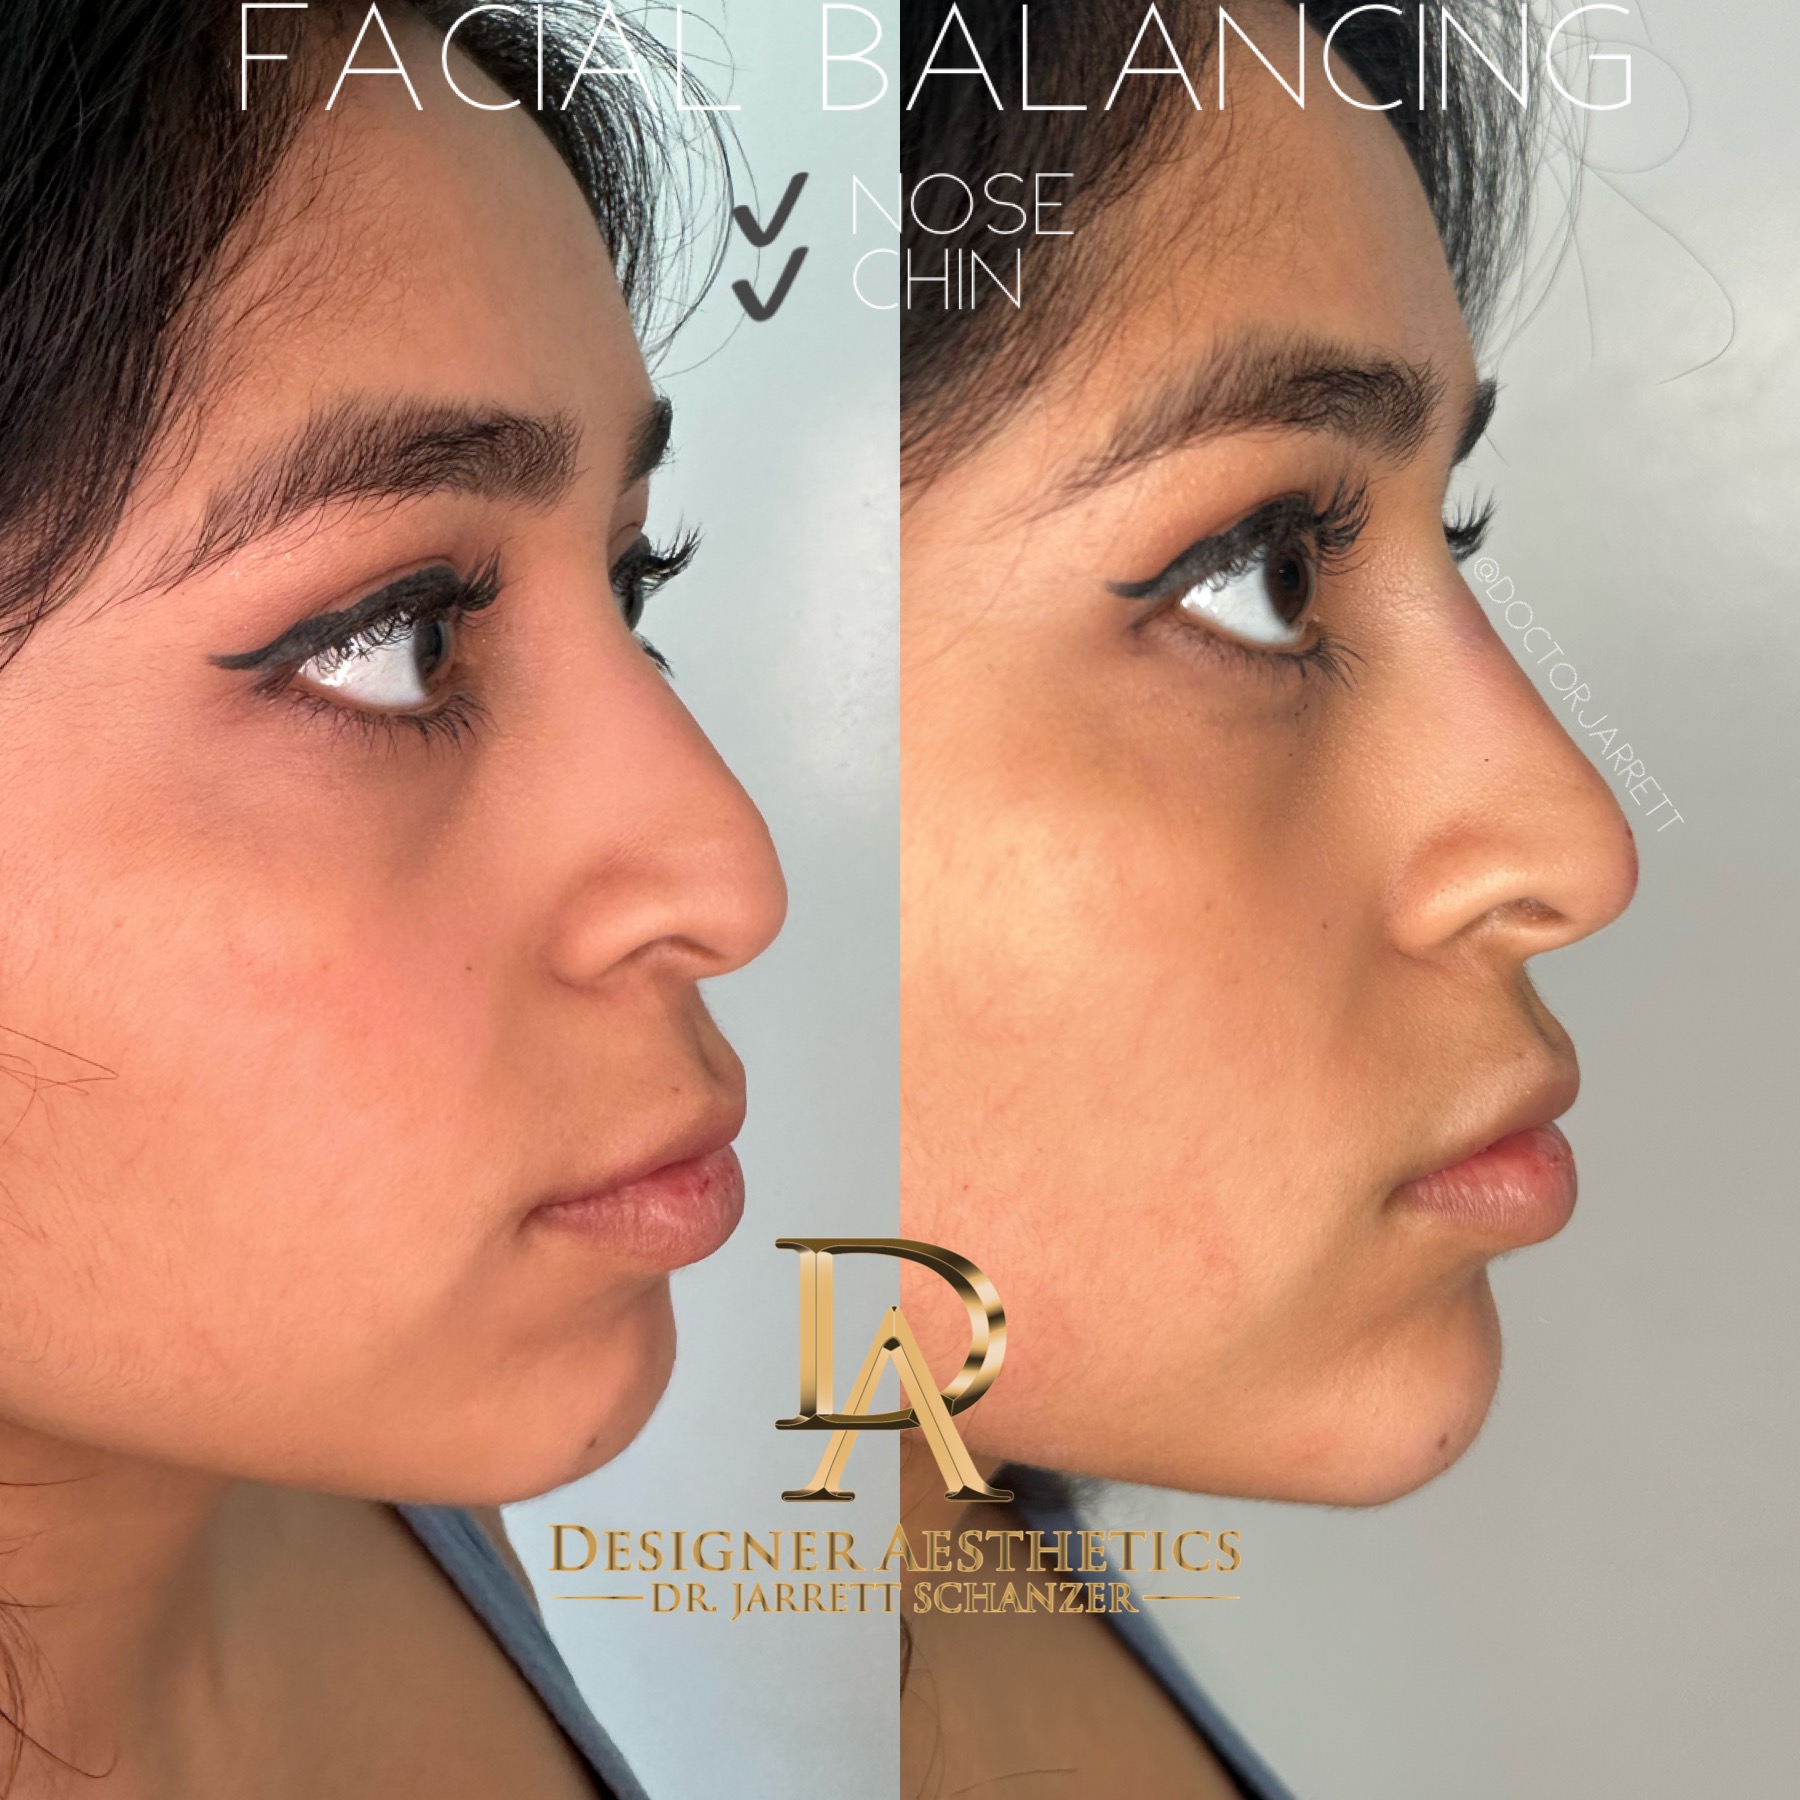 Nonsurgical Rhinoplasty nose nose job injector injecting fillers botox no surgery best nose job americas top 100 injector doctor miami new york brickell south beach soho miami beach med spa aesthetics beauty transformation injection liquid nose job